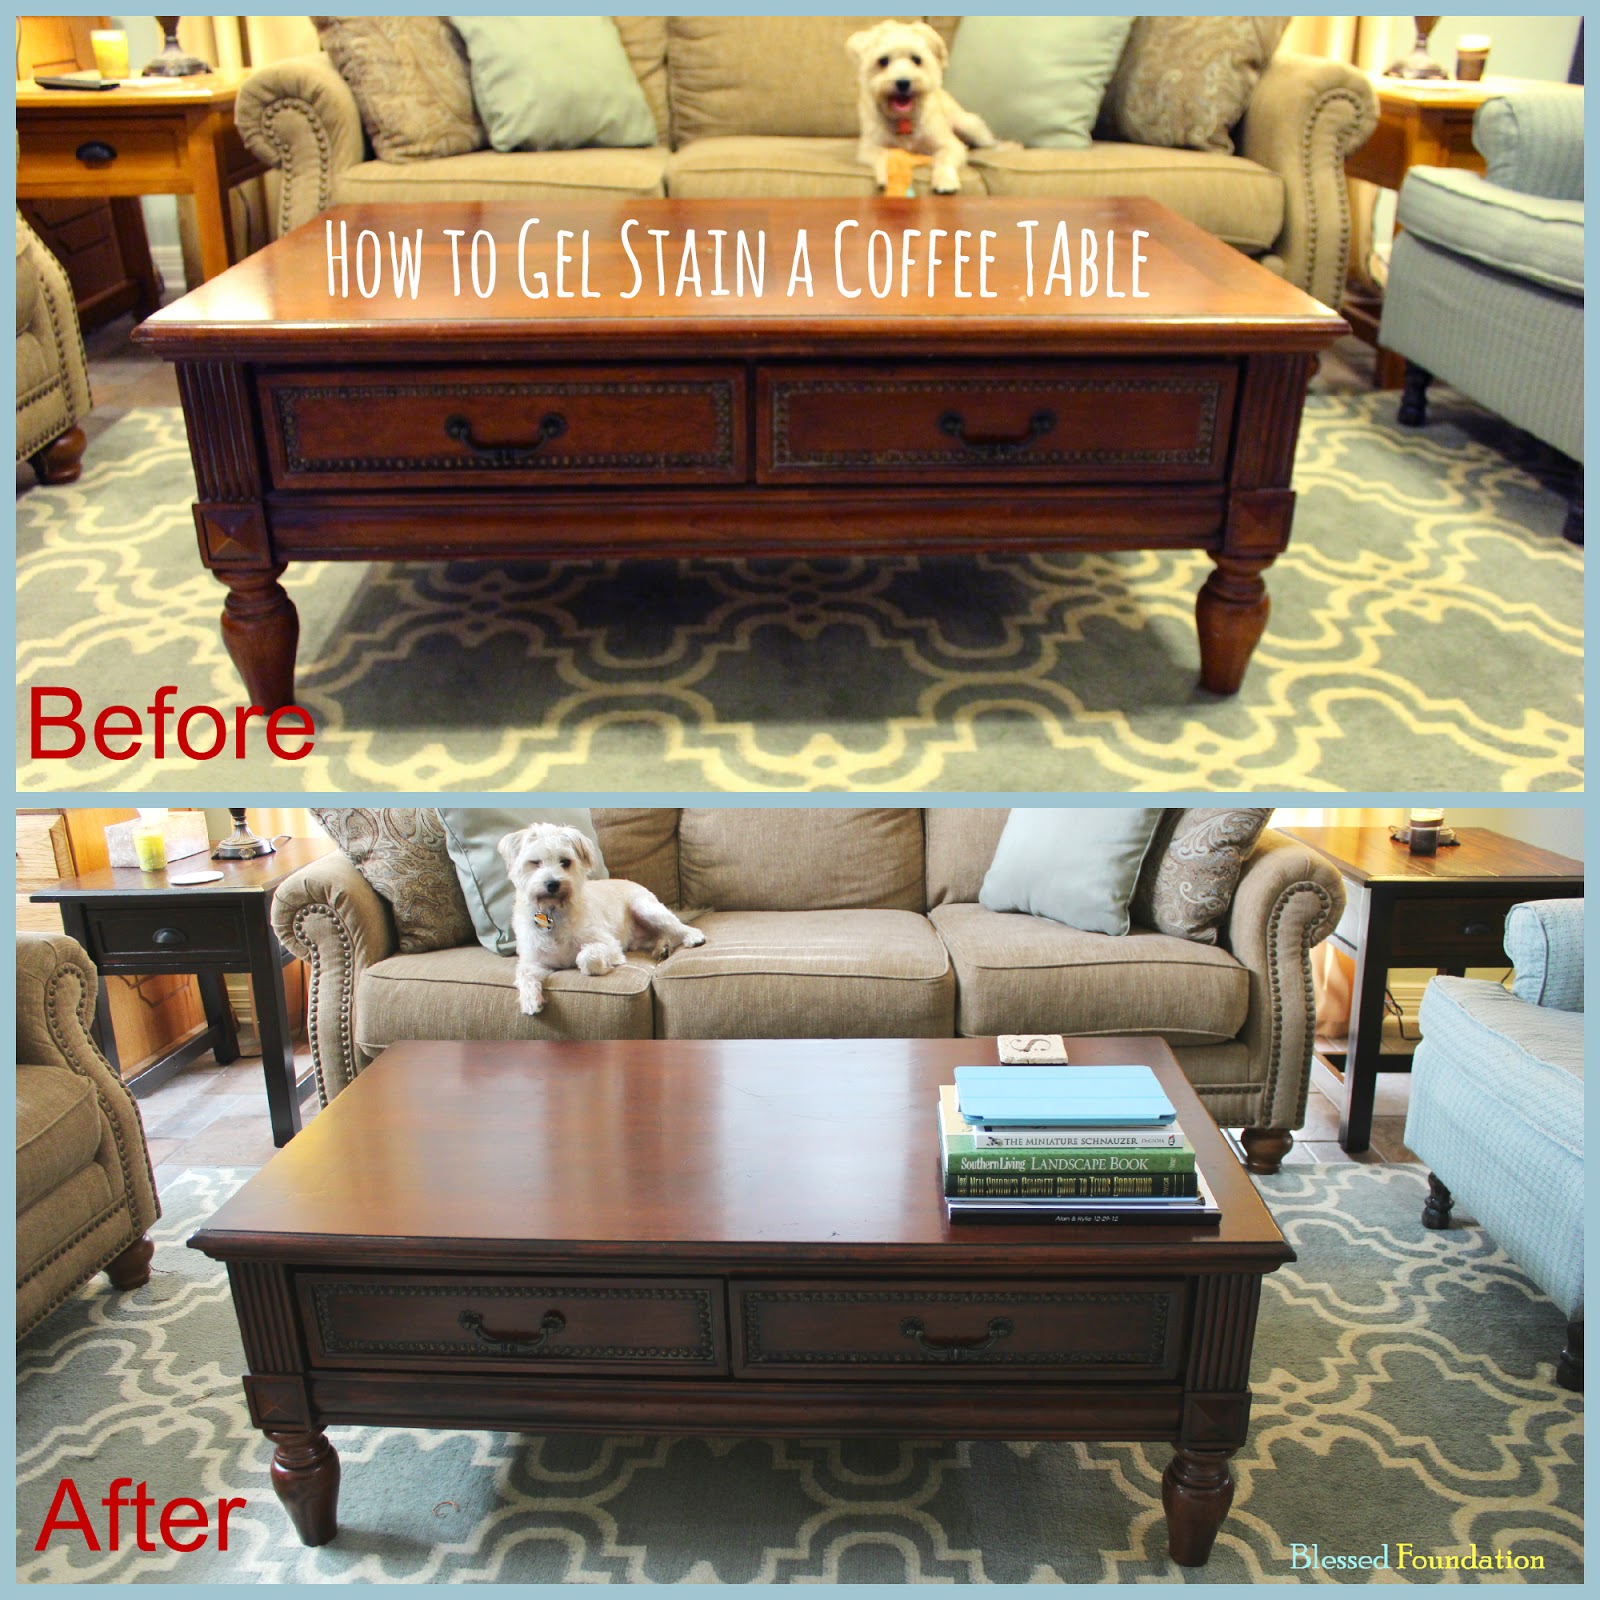 Blessed Foundation: Post 24: Coffee Table Makeover: Gel Stain